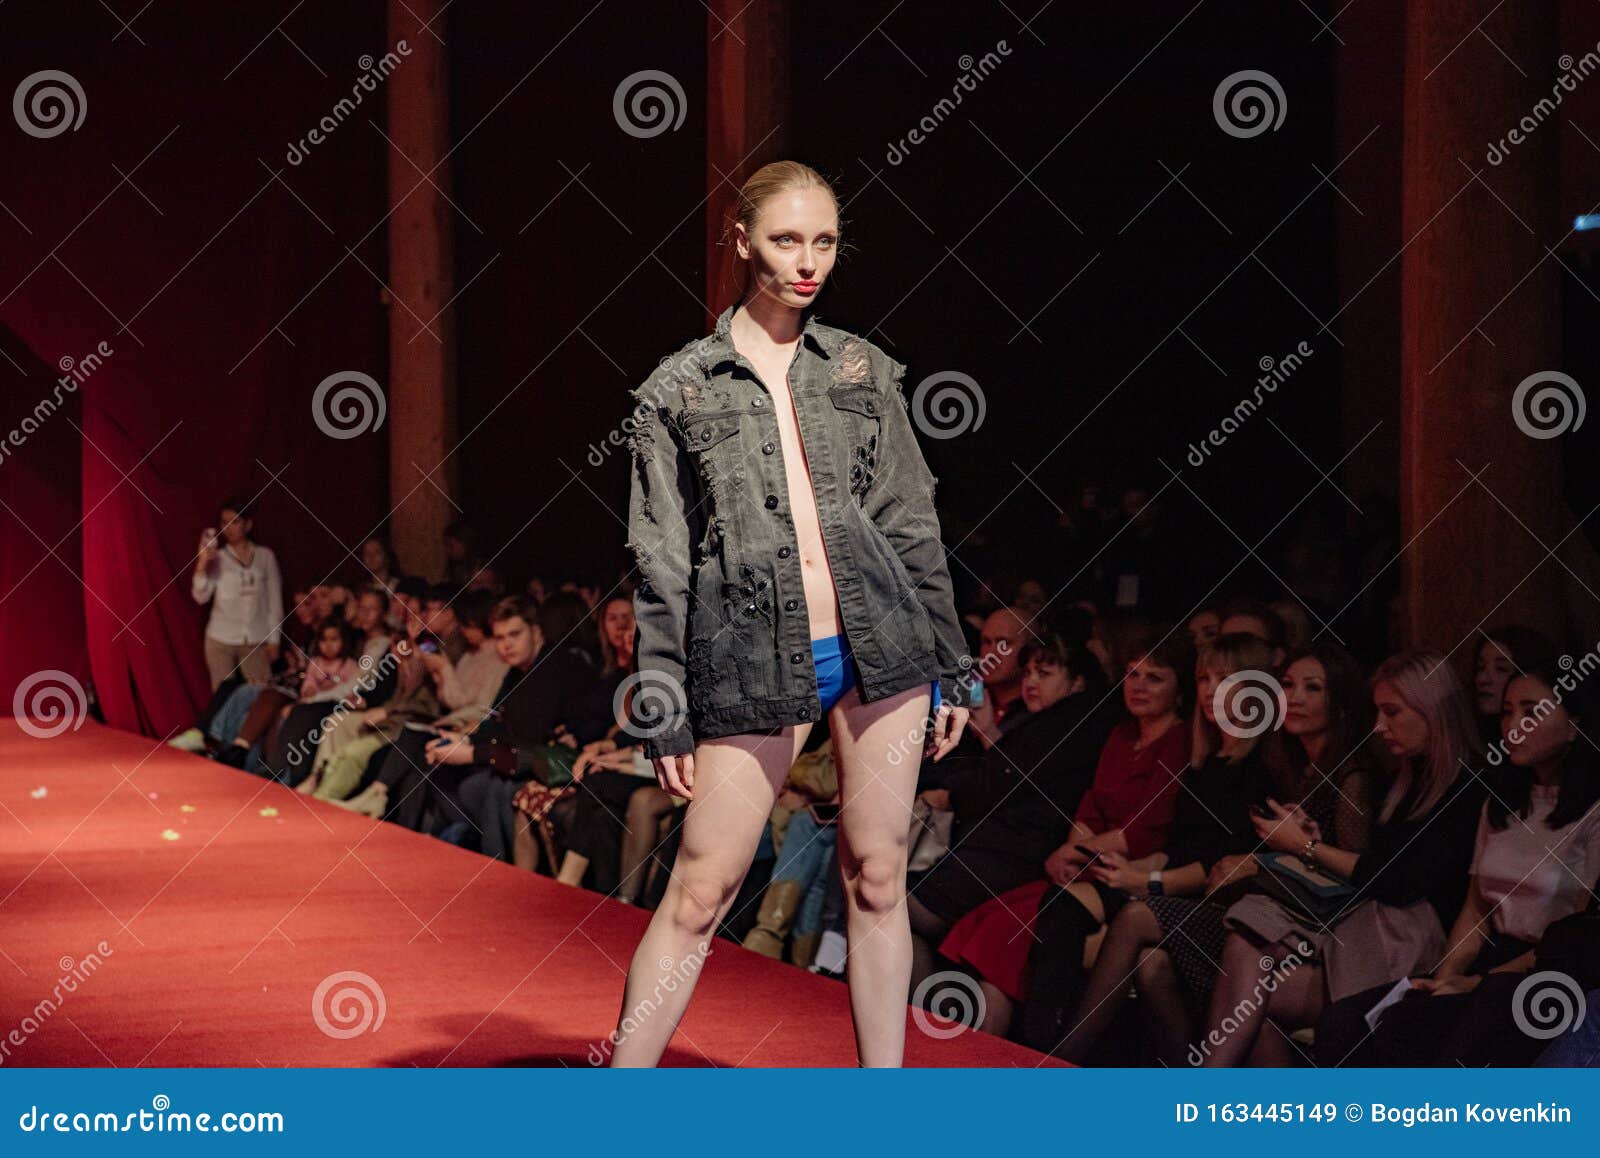 Sexy Models Catwalk Photos - Free Royalty-Free Stock Photos from Dreamstime